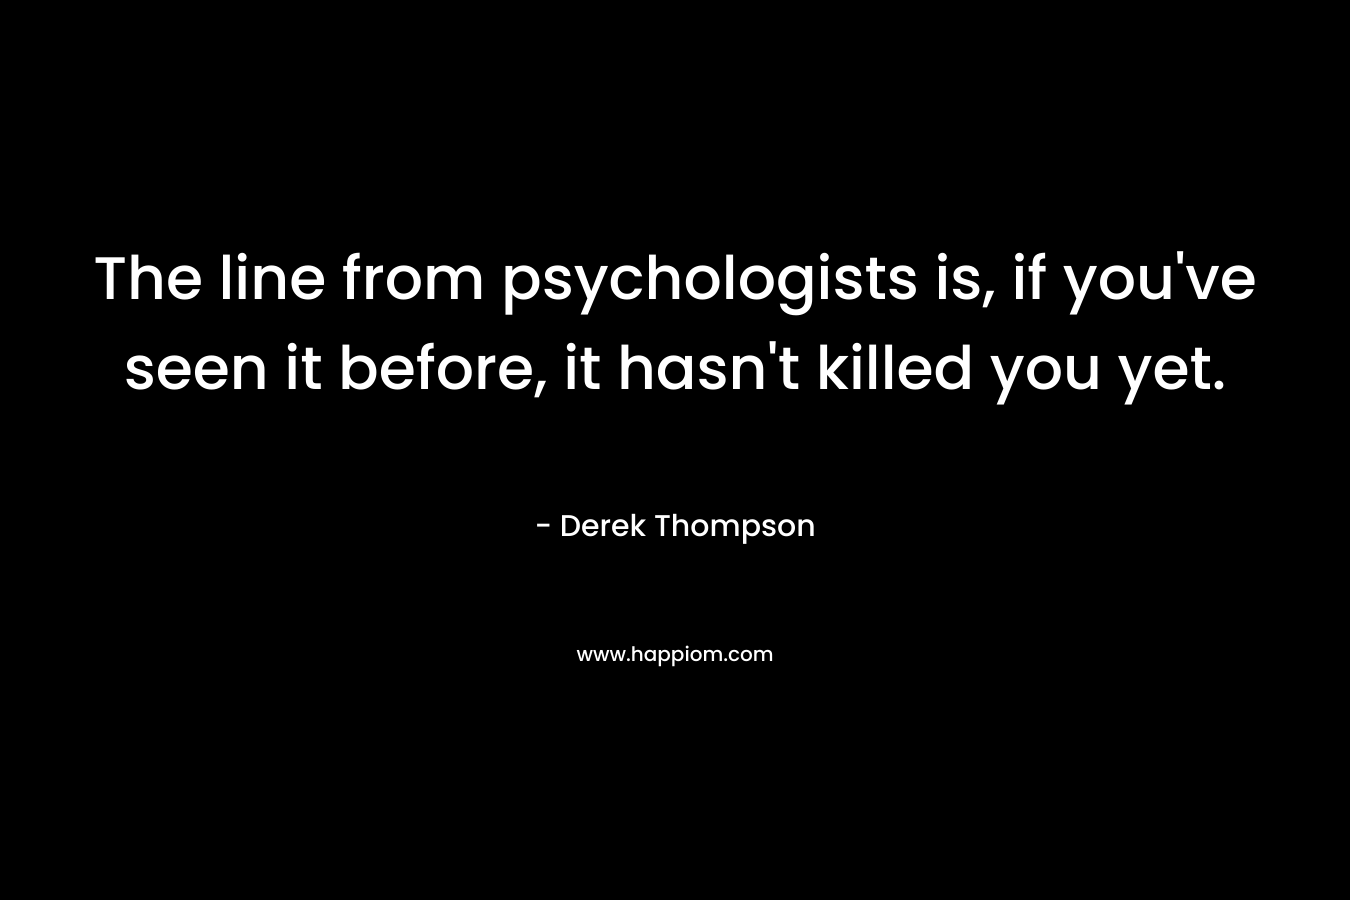 The line from psychologists is, if you've seen it before, it hasn't killed you yet.